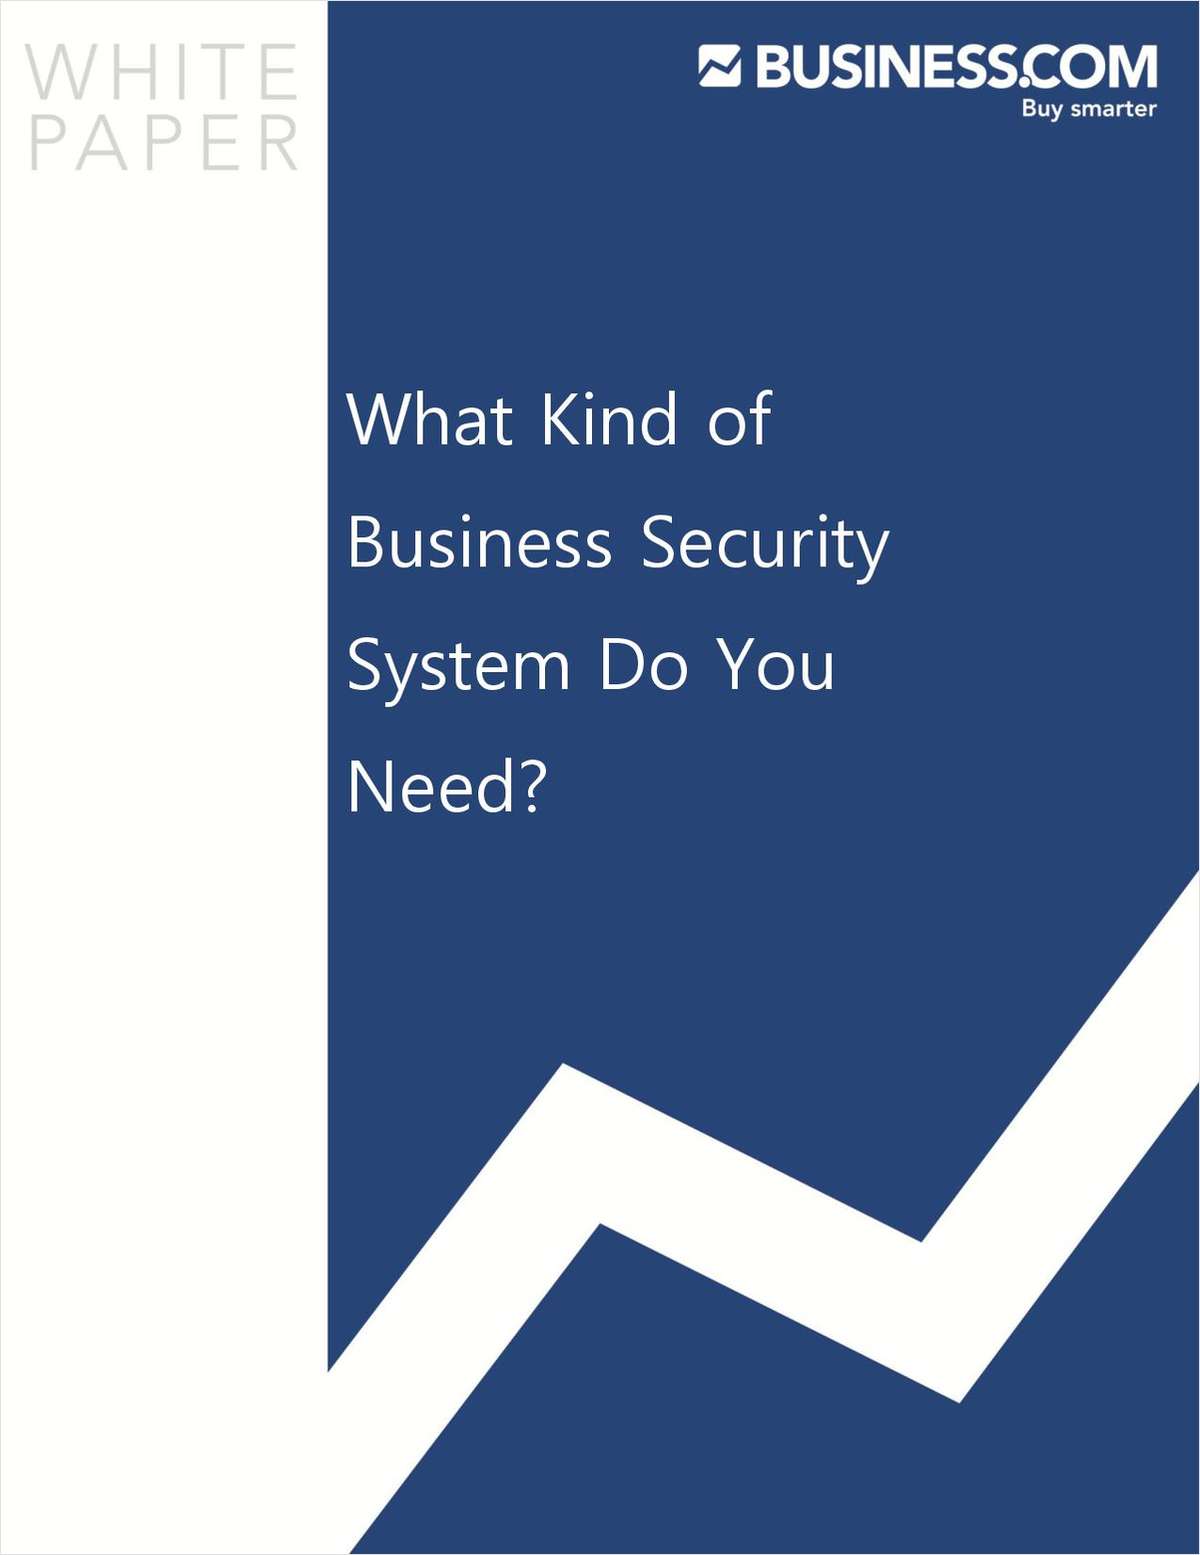 What Kind of Business Security System Do You Need?